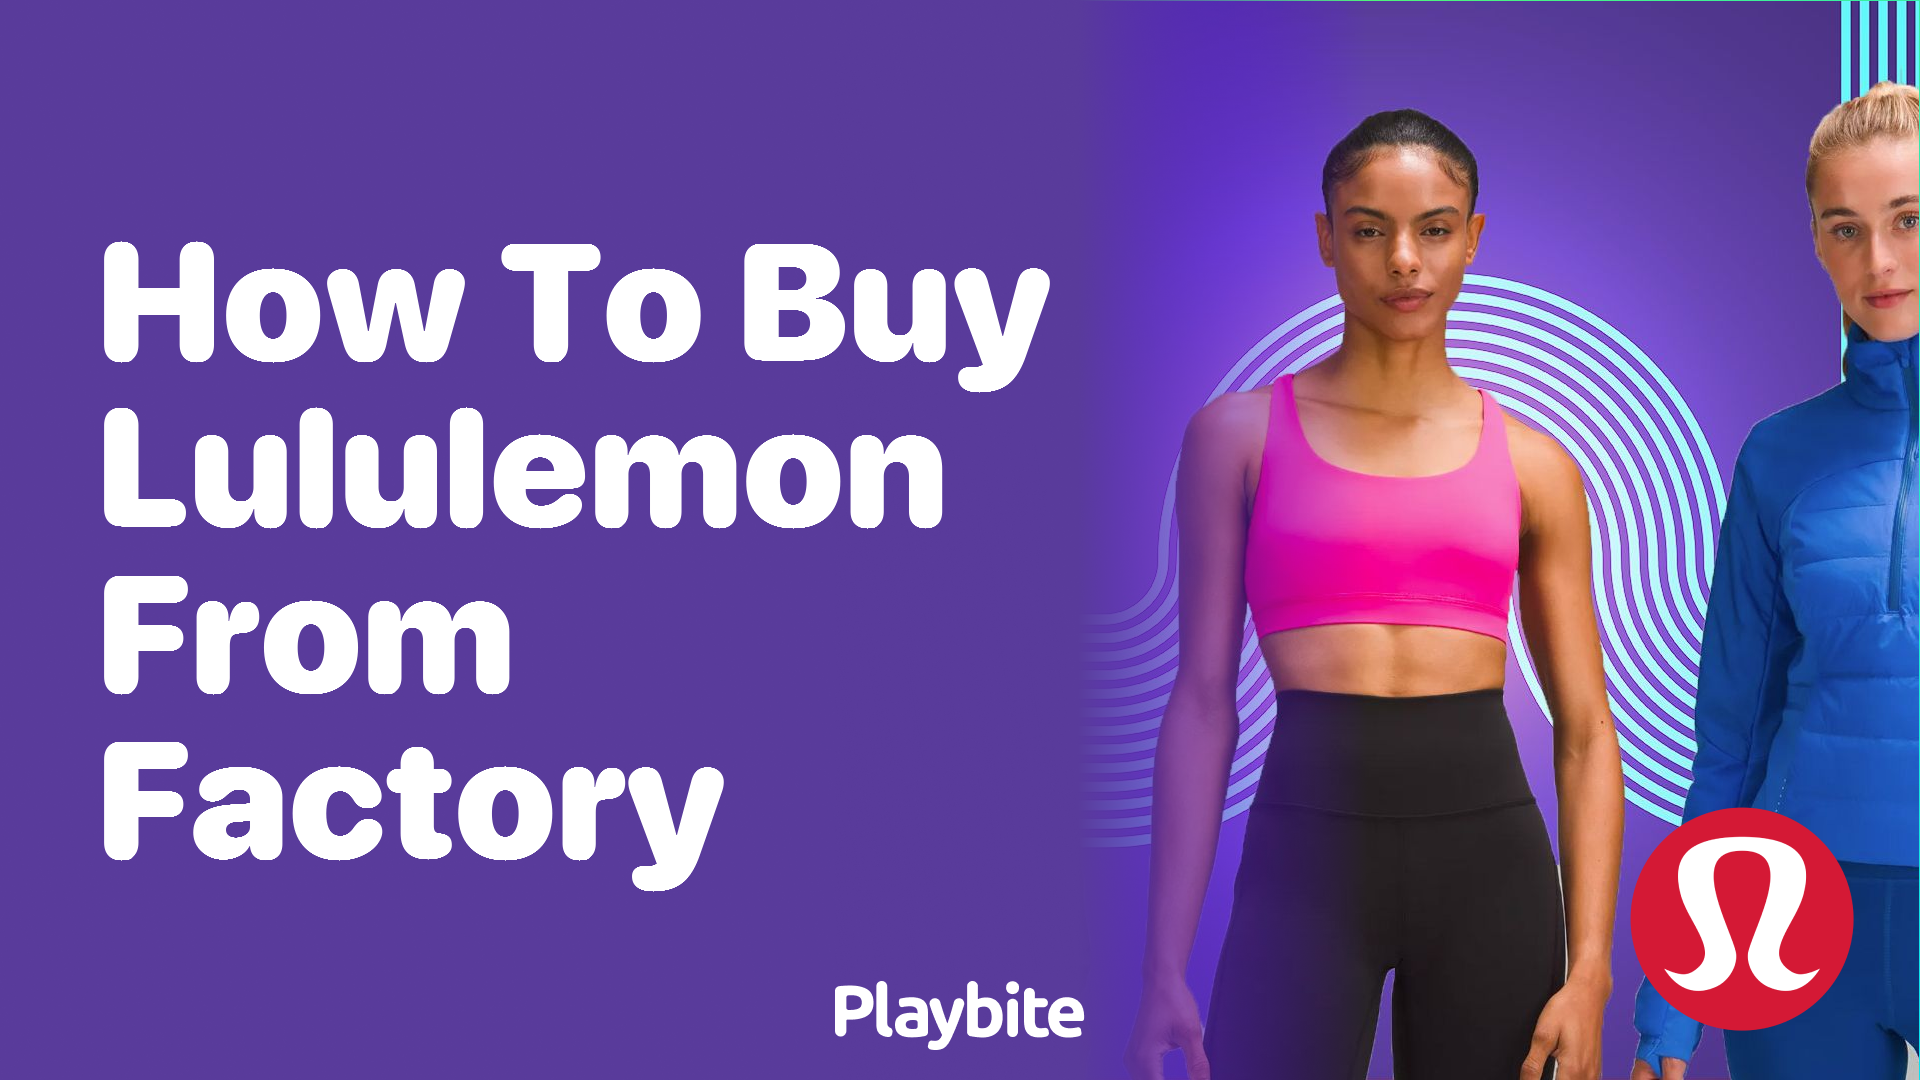 How to Buy Lululemon from the Factory - Playbite